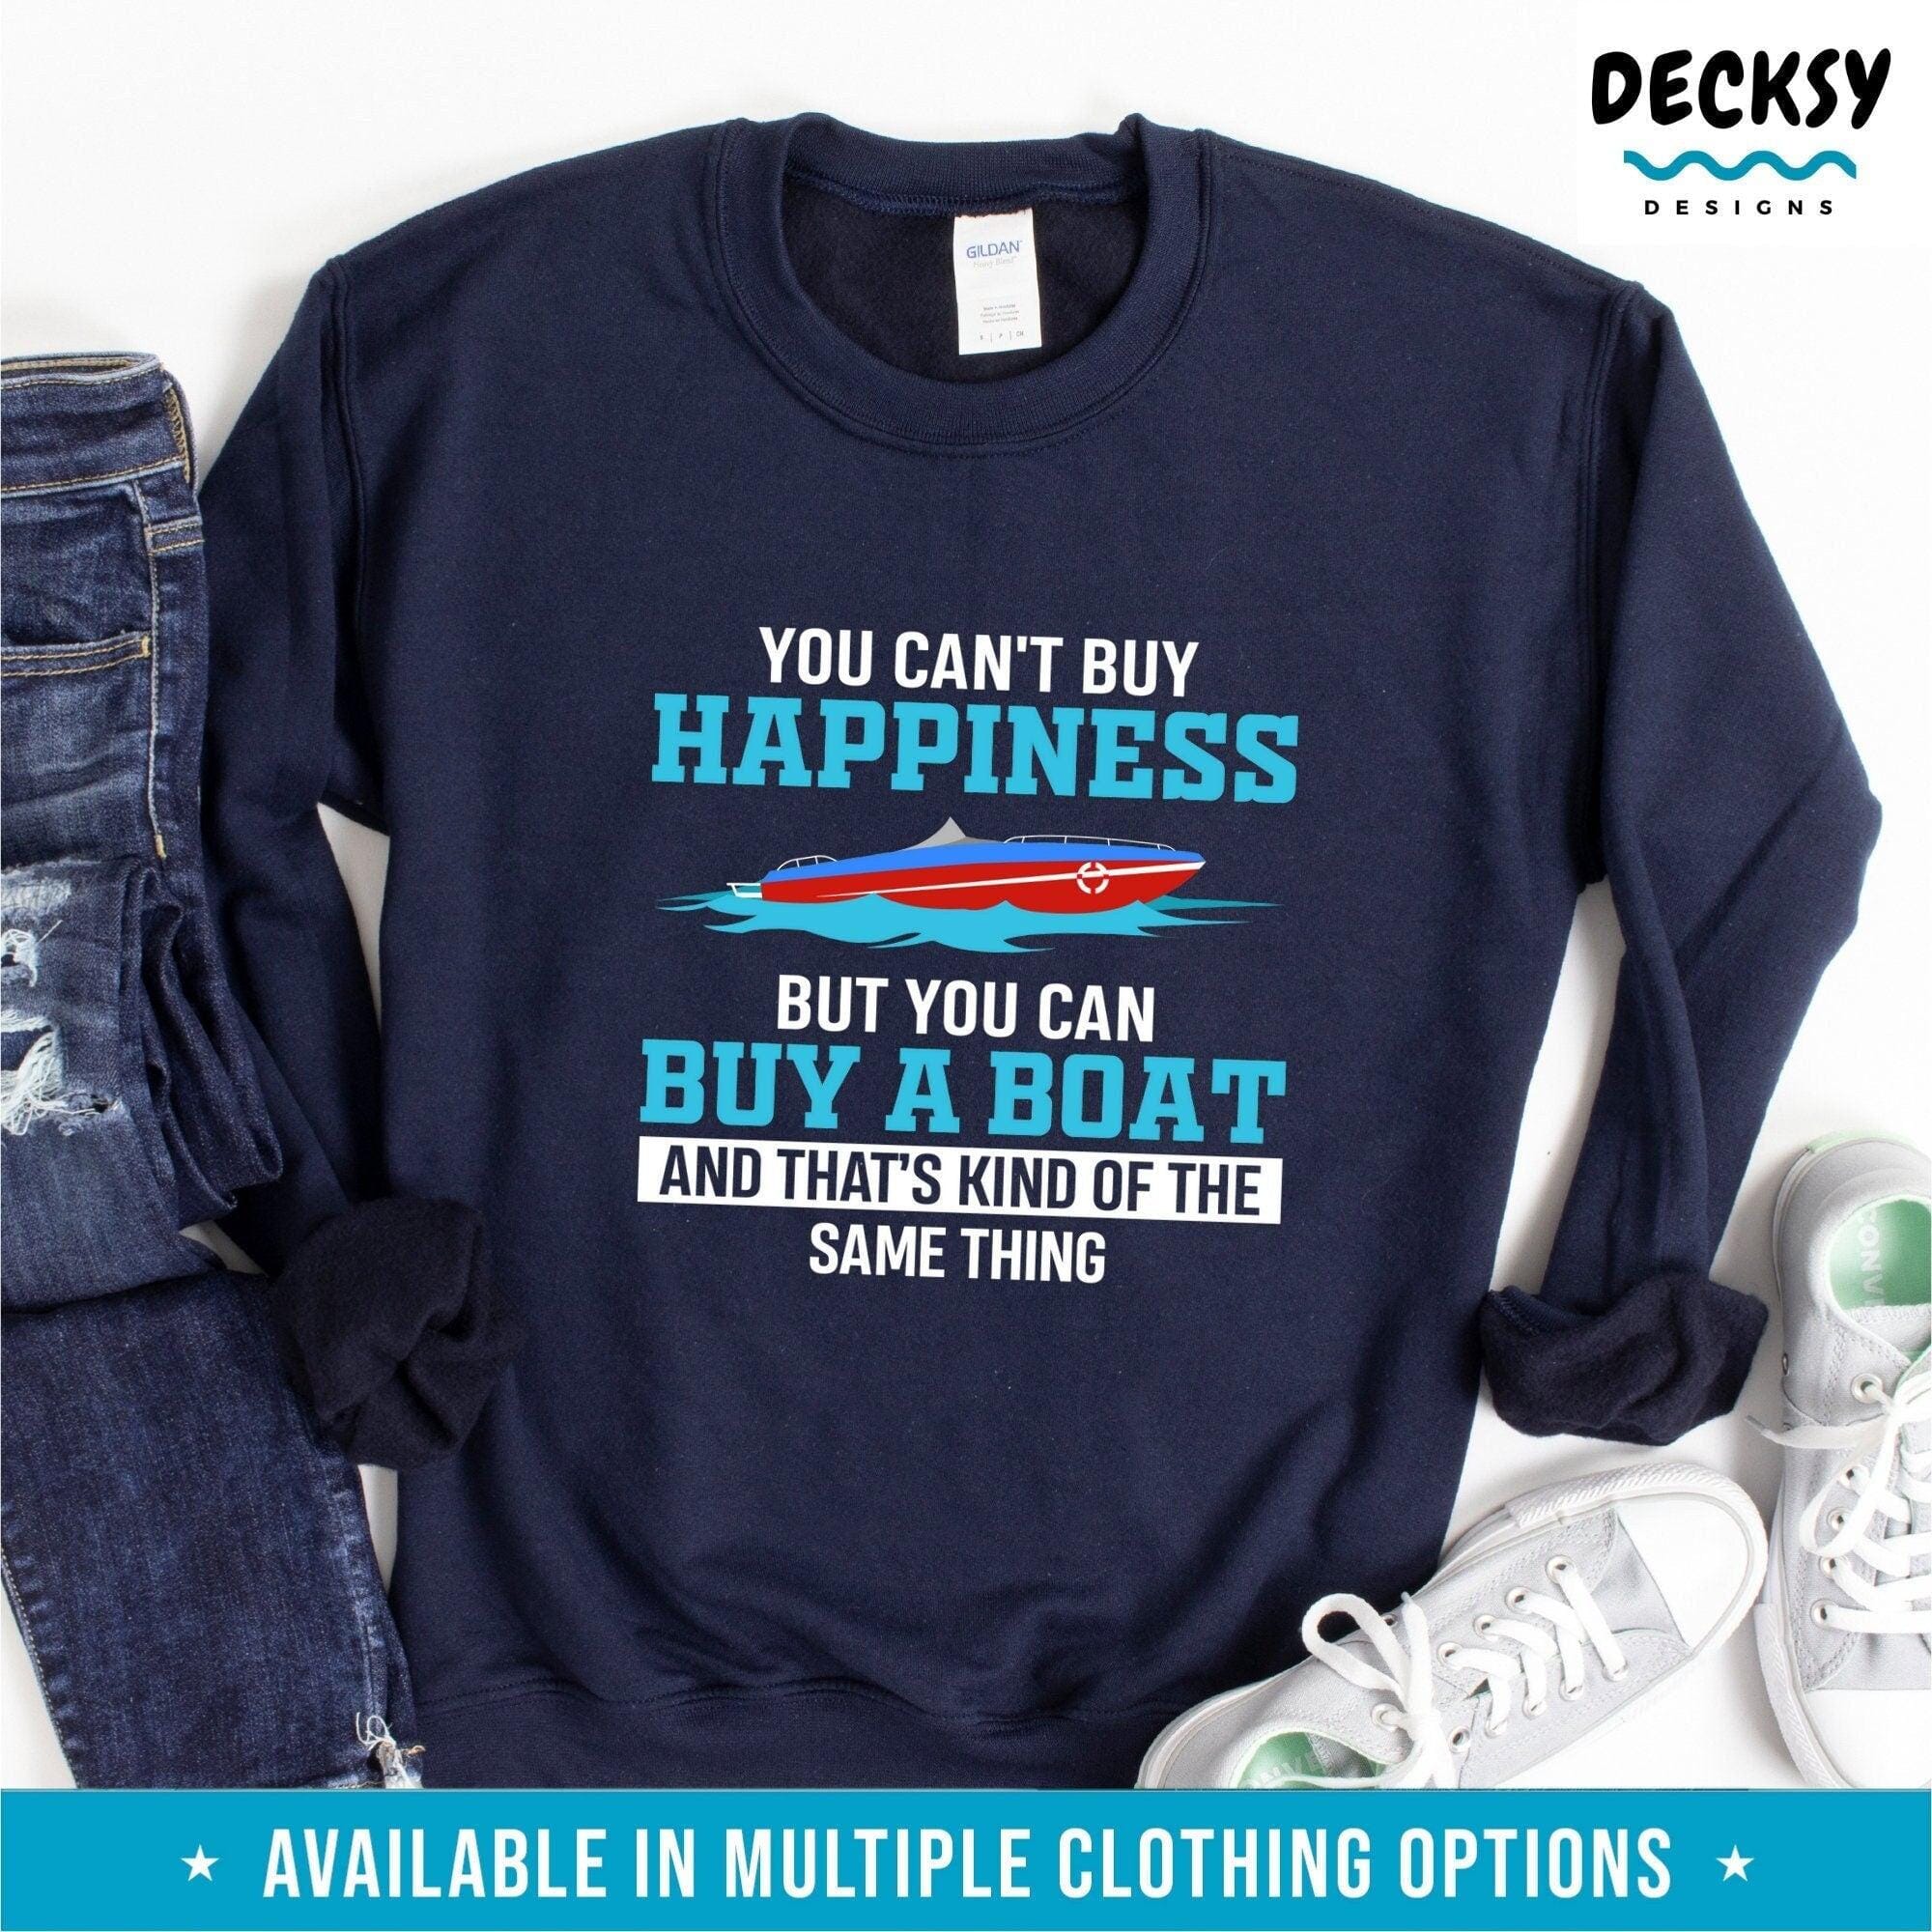 Funny Boating Shirt, Gift For Boater-Clothing:Gender-Neutral Adult Clothing:Tops & Tees:T-shirts:Graphic Tees-DecksyDesigns